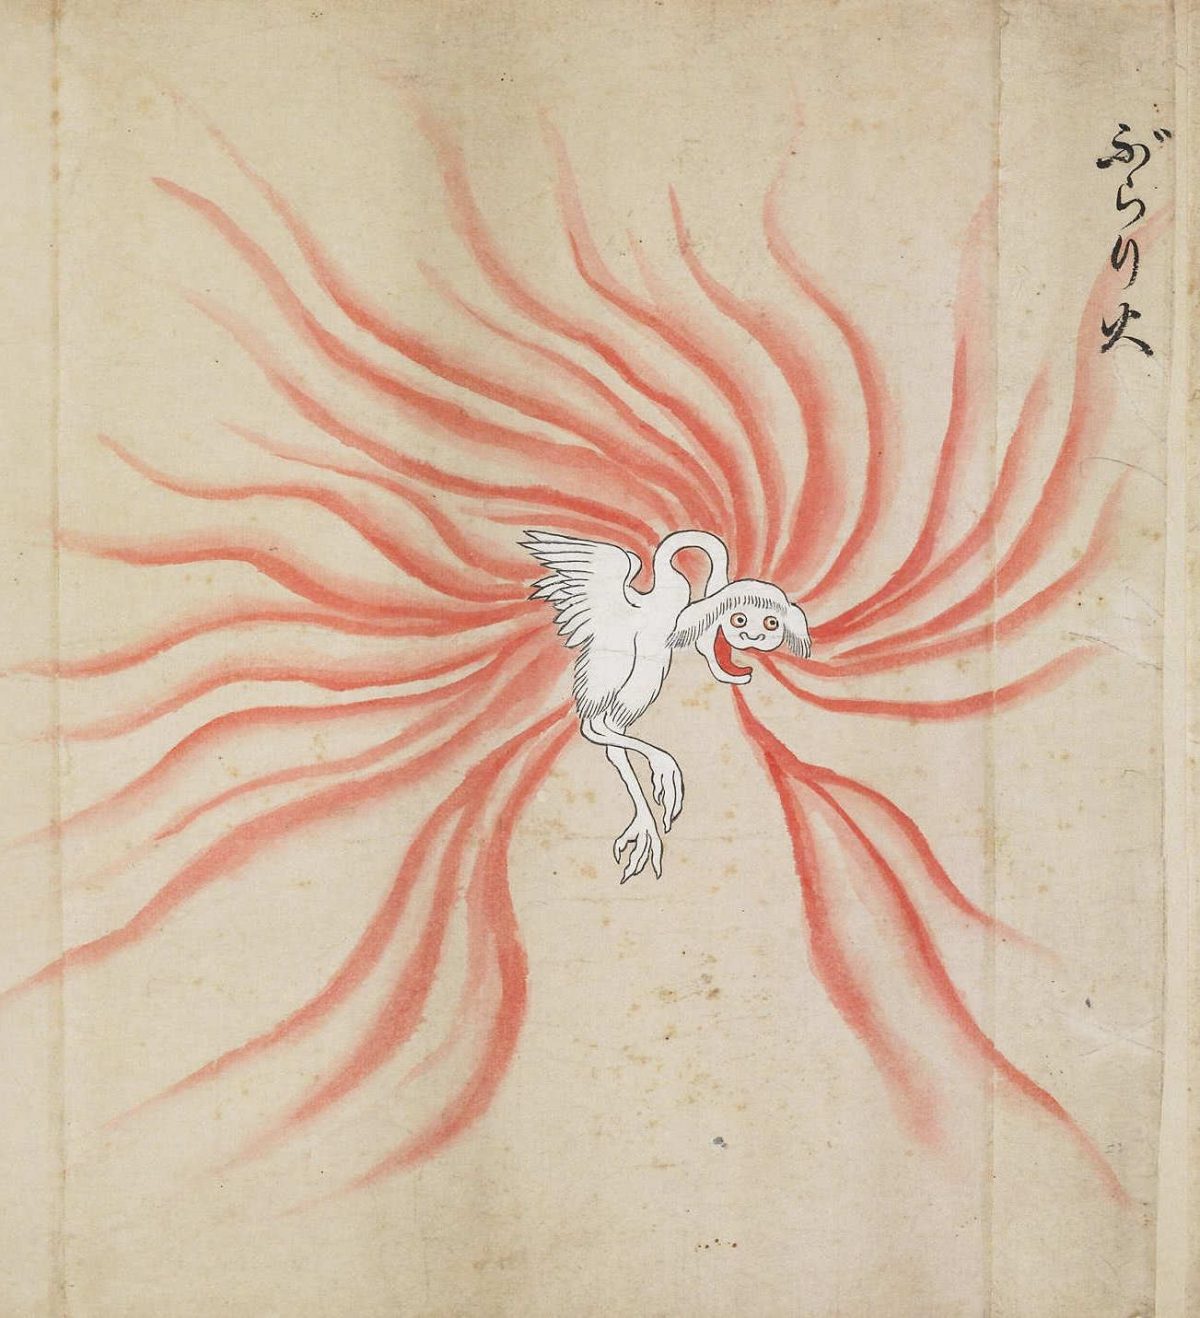 Buraribi (ぶらり火) is a white, bird-like creature surrounded by ghostly flames.jpg